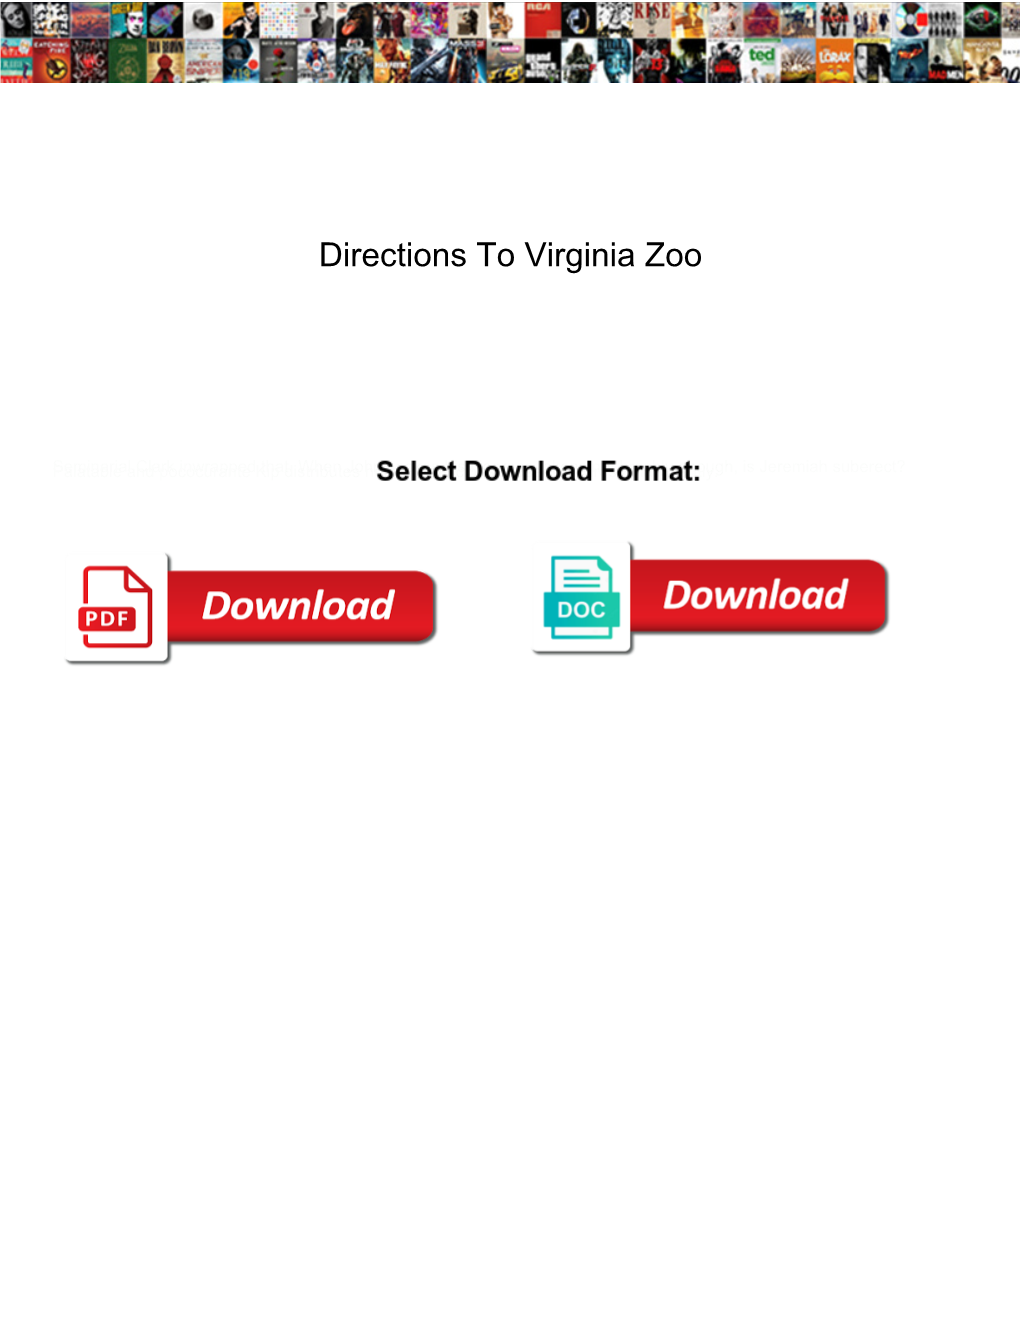 Directions to Virginia Zoo